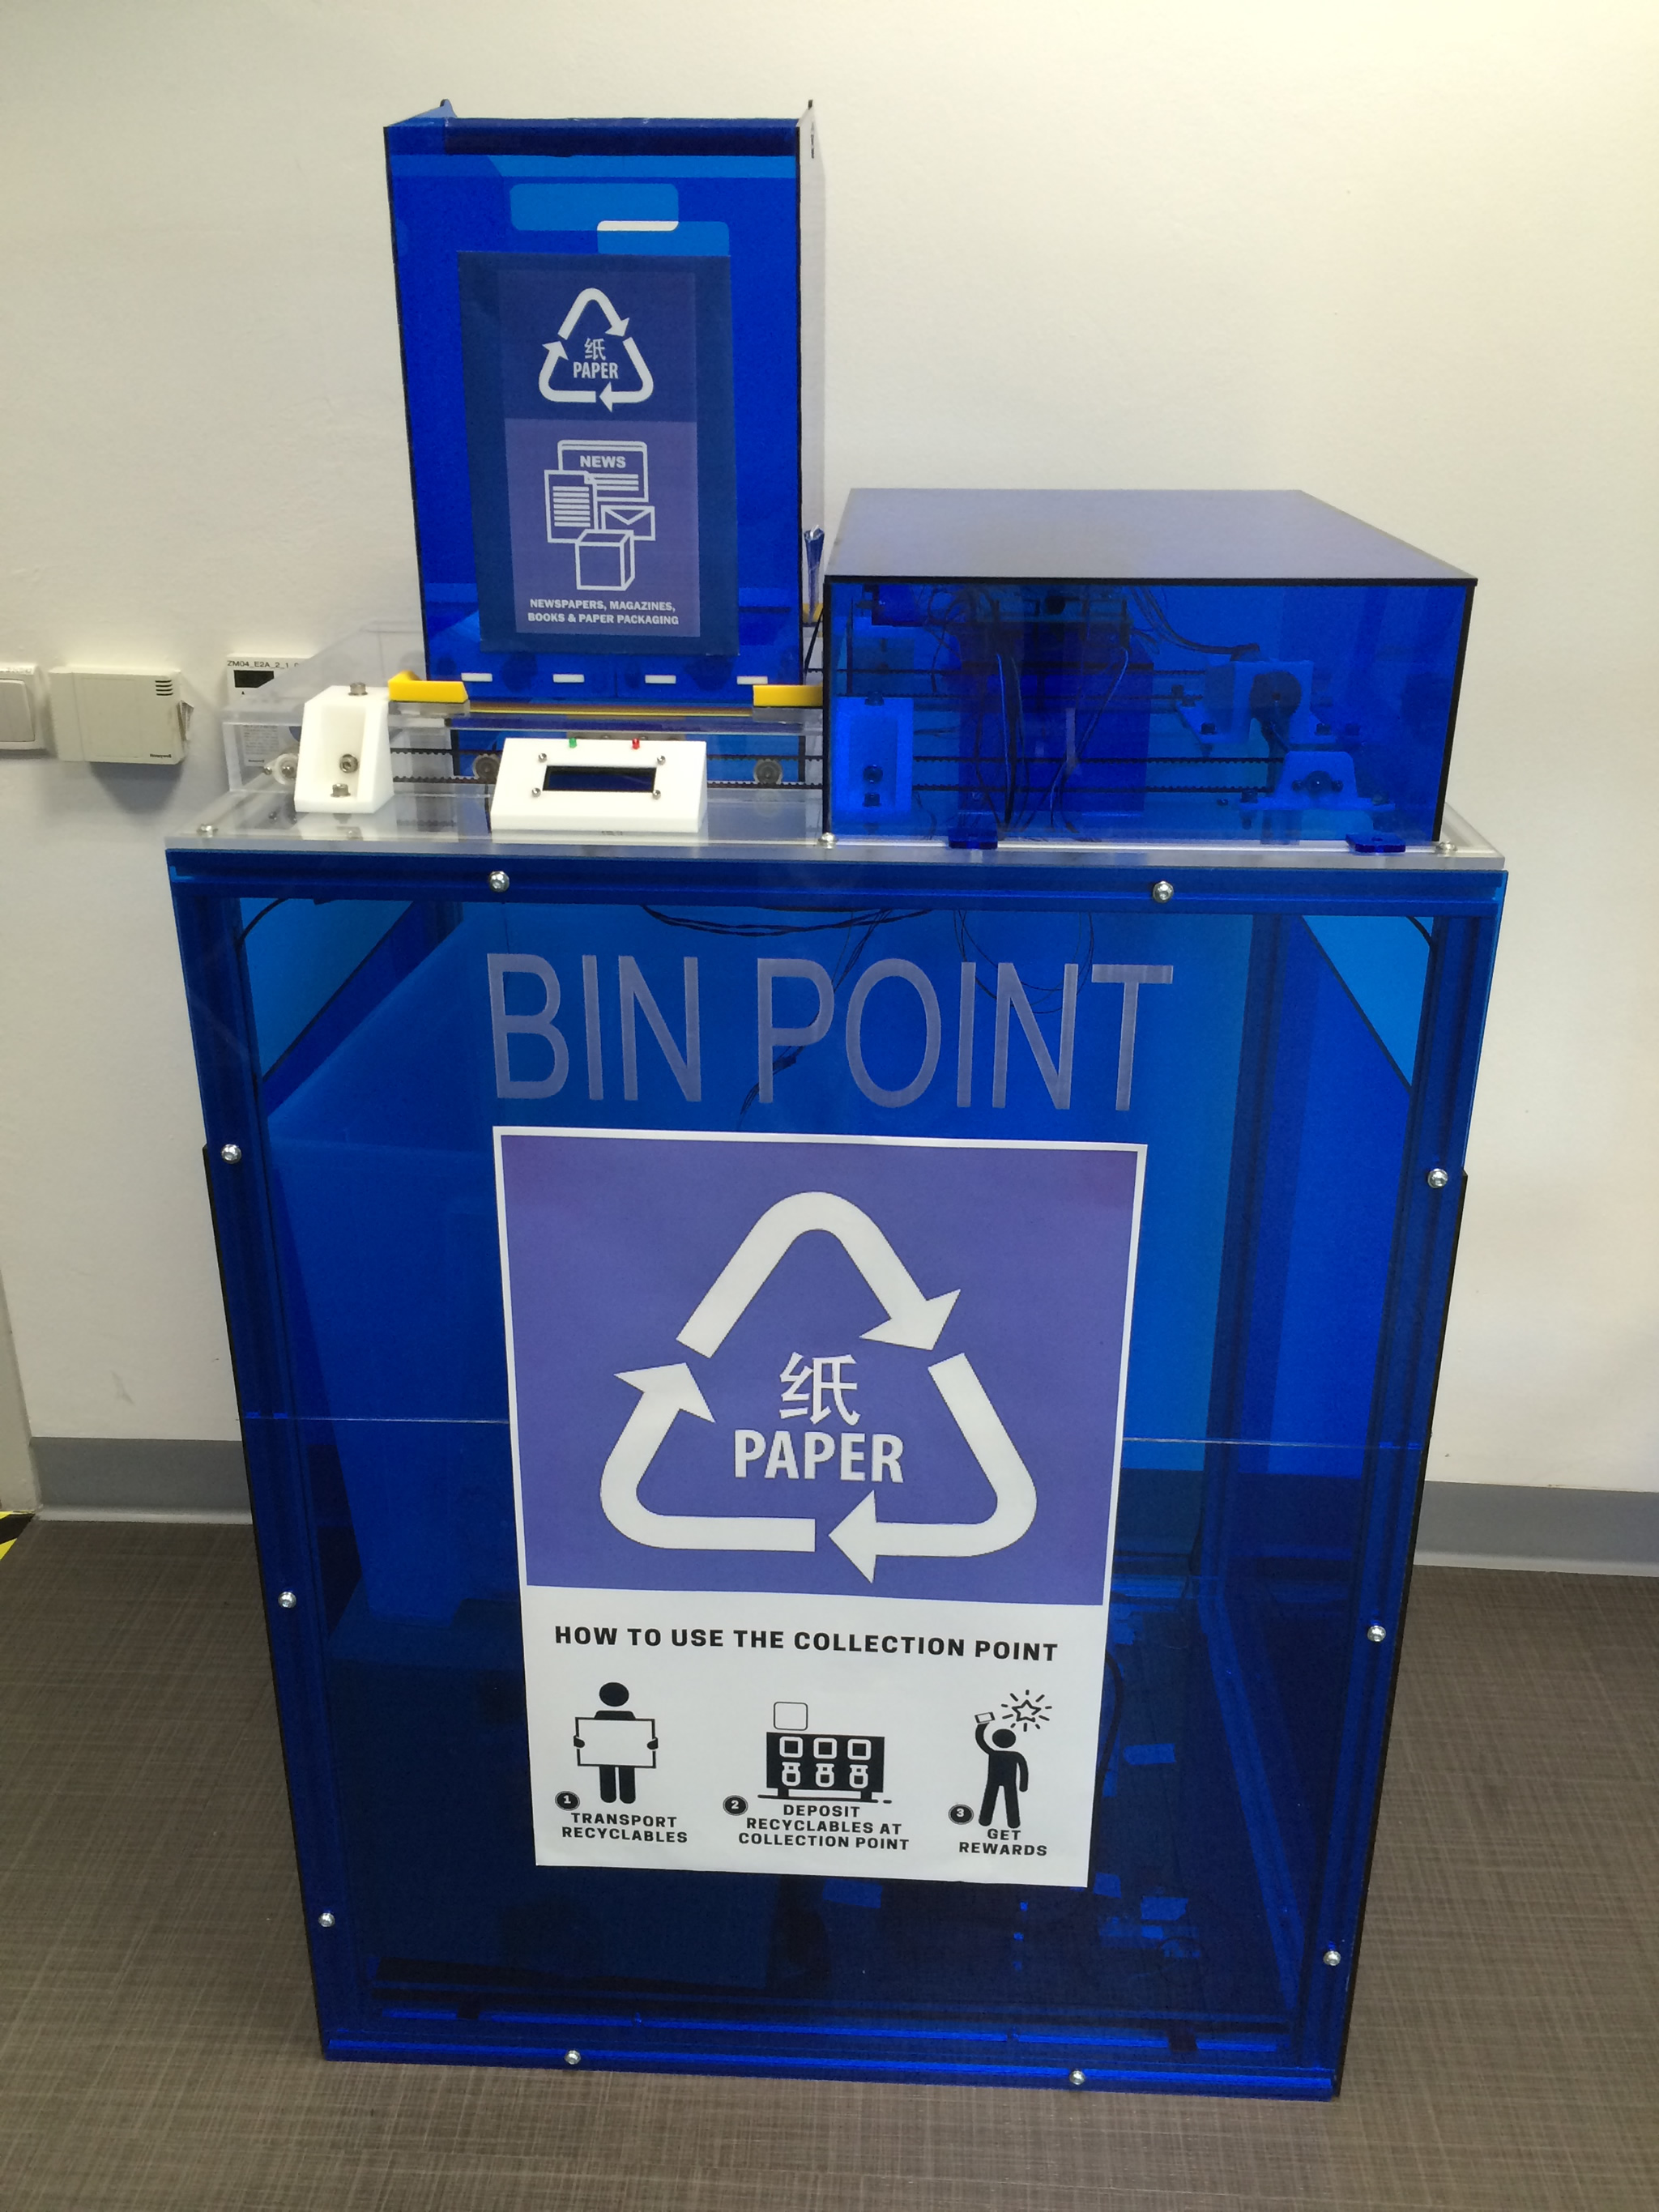 Bin Point: A novel approach for promoting recycling in HDB estates